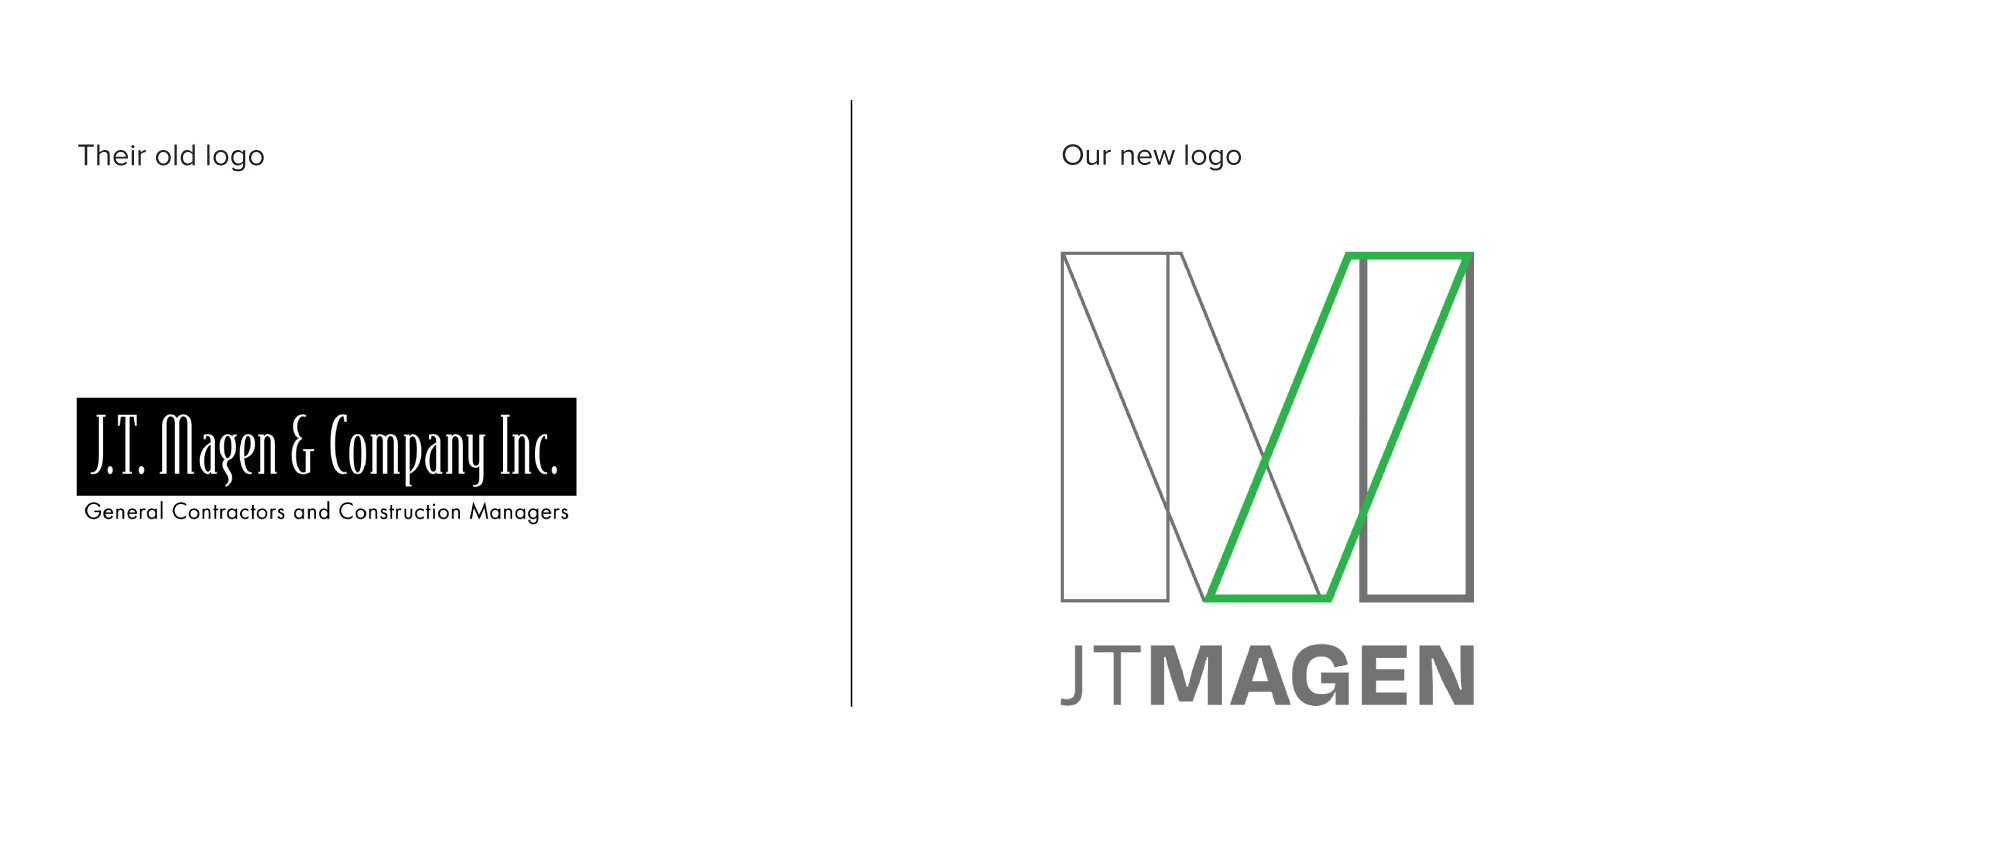 a before and after portrayal of the J.T Magen logo